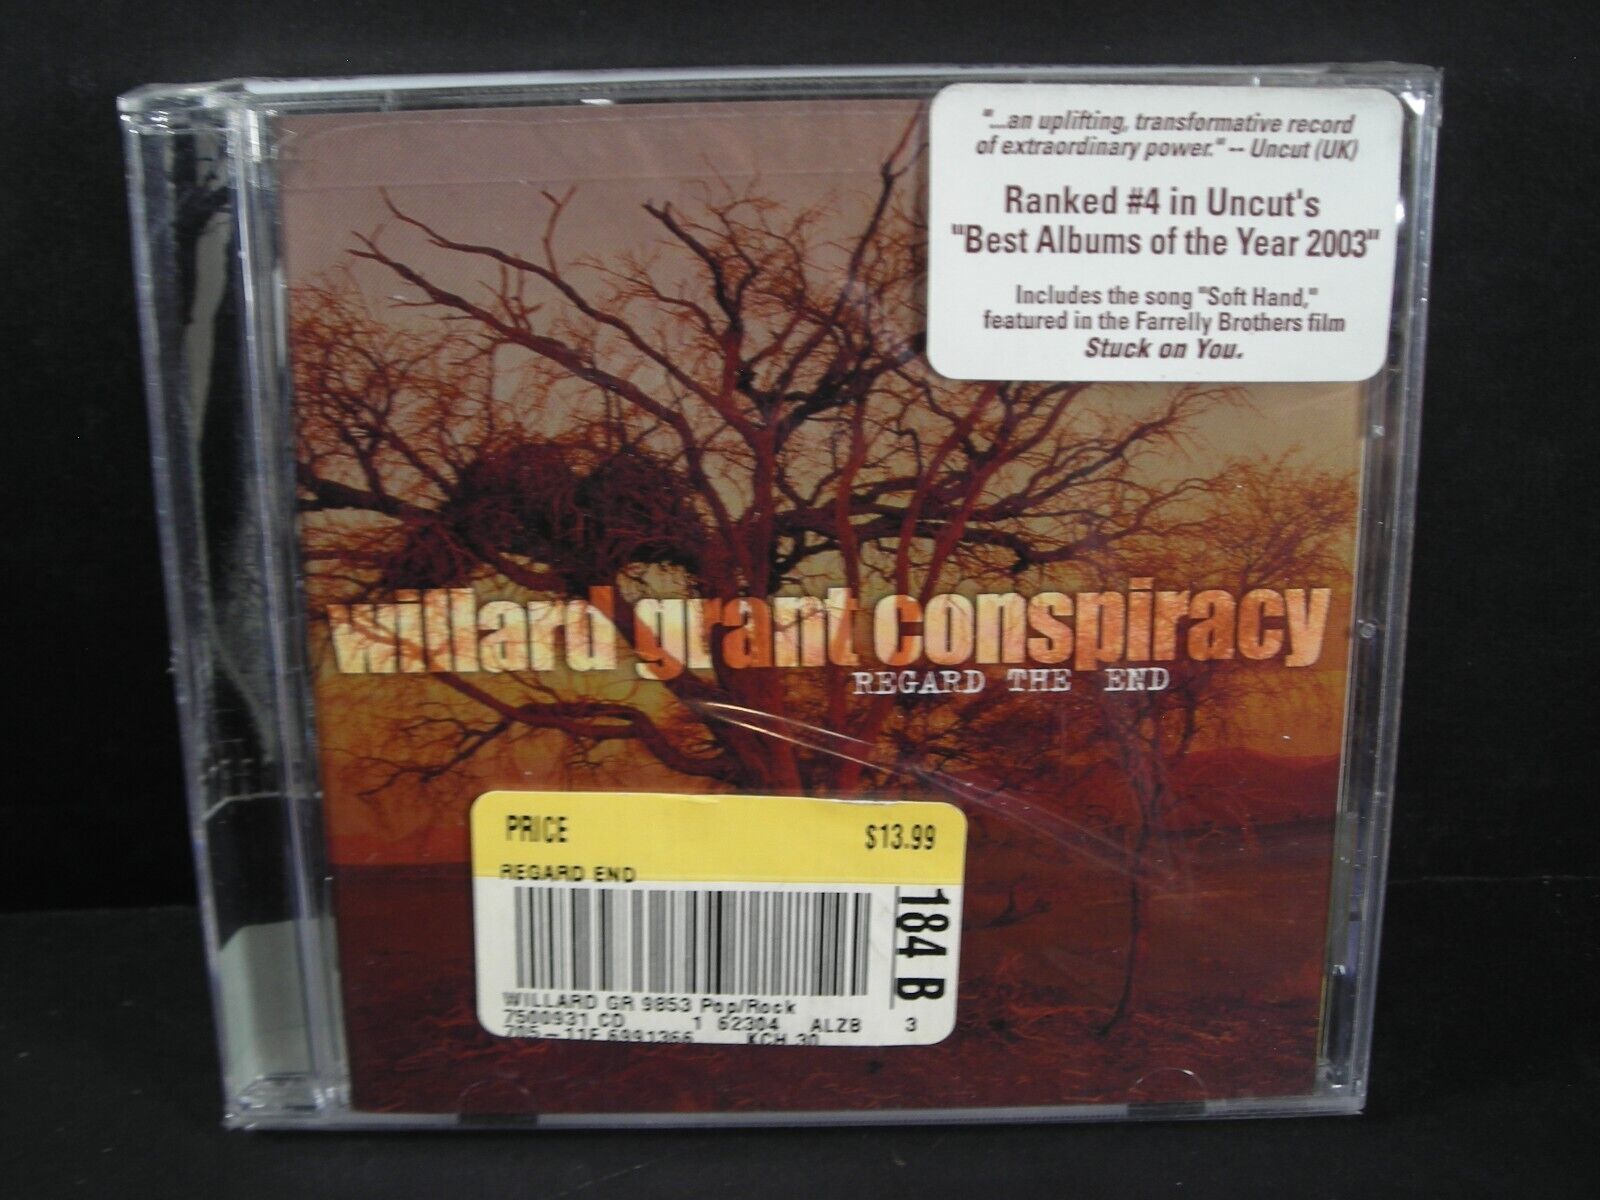 Regard the End by Willard Grant Conspiracy (CD, Oct-2005, Kimchee Records)